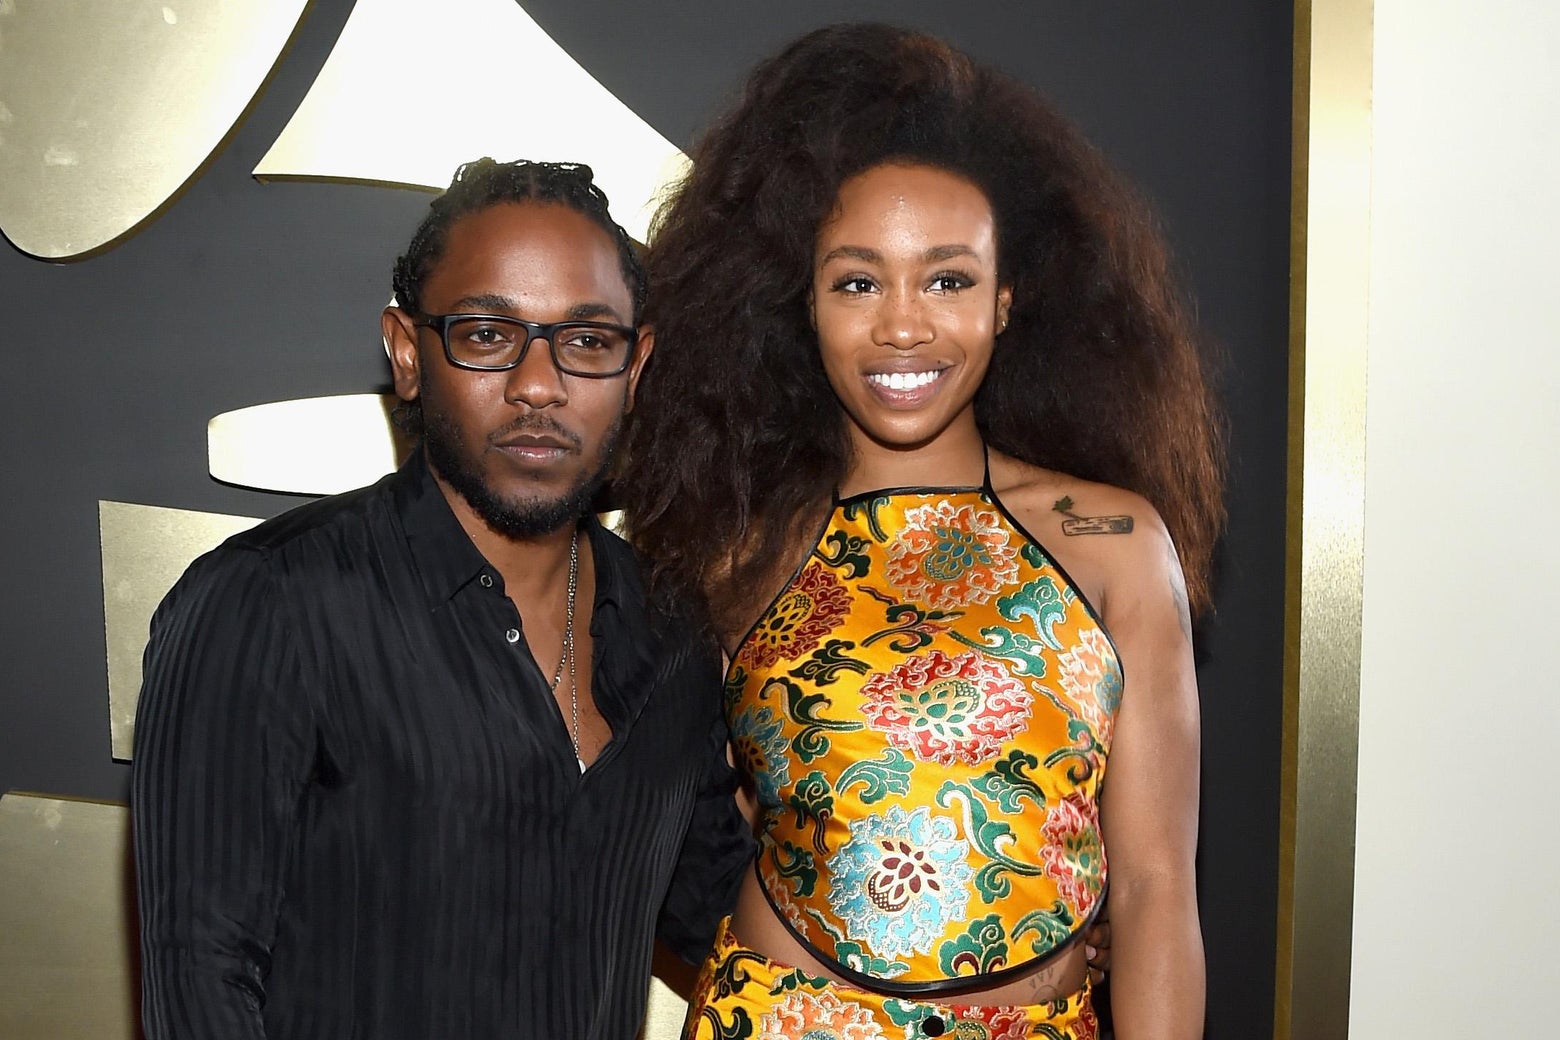 Kendrick Lamar and SZA drop “All the Stars” from the Black Panther